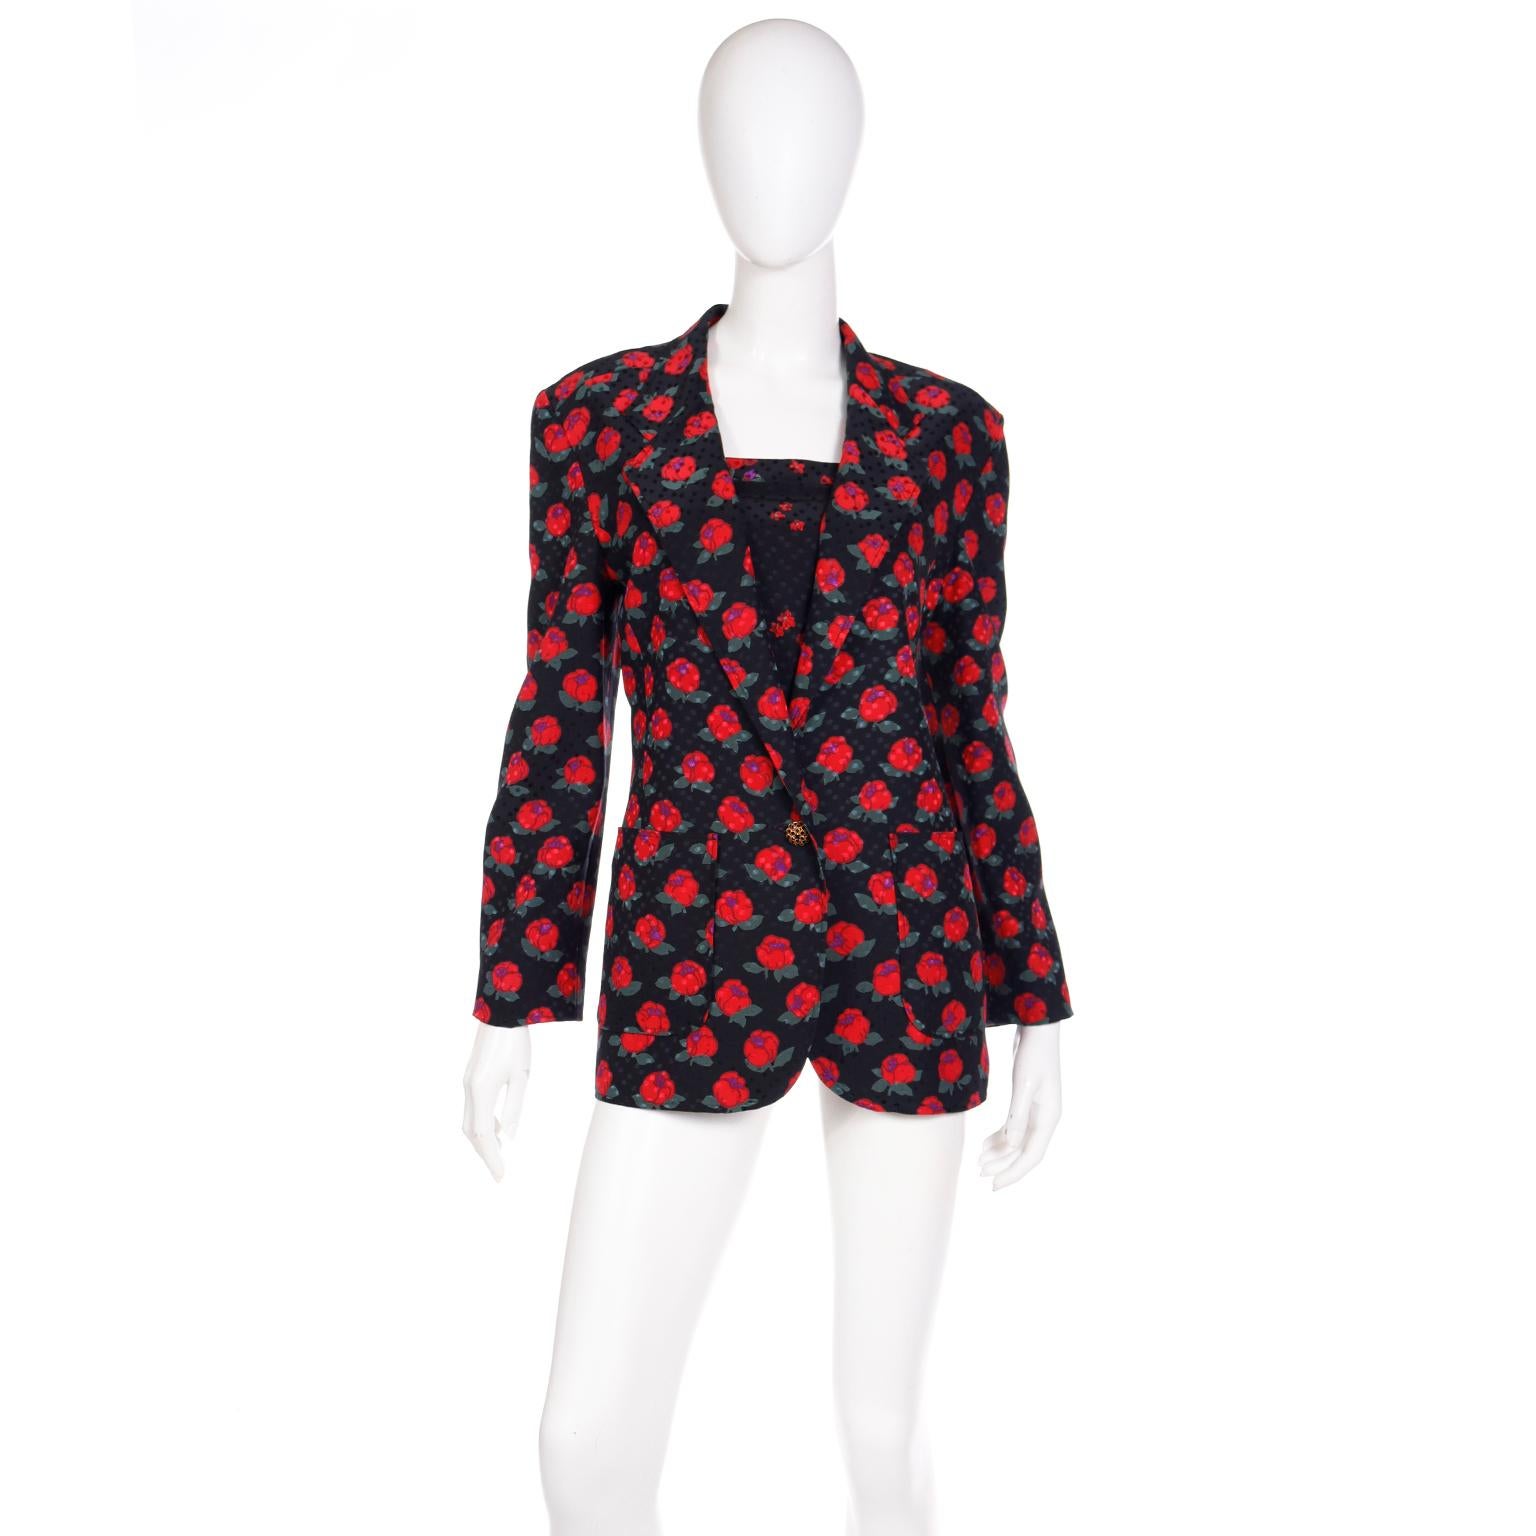 Vintage Louis Feraud  Silk Black and Red Rose Print Jacket and Camisole Top  In Excellent Condition For Sale In Portland, OR